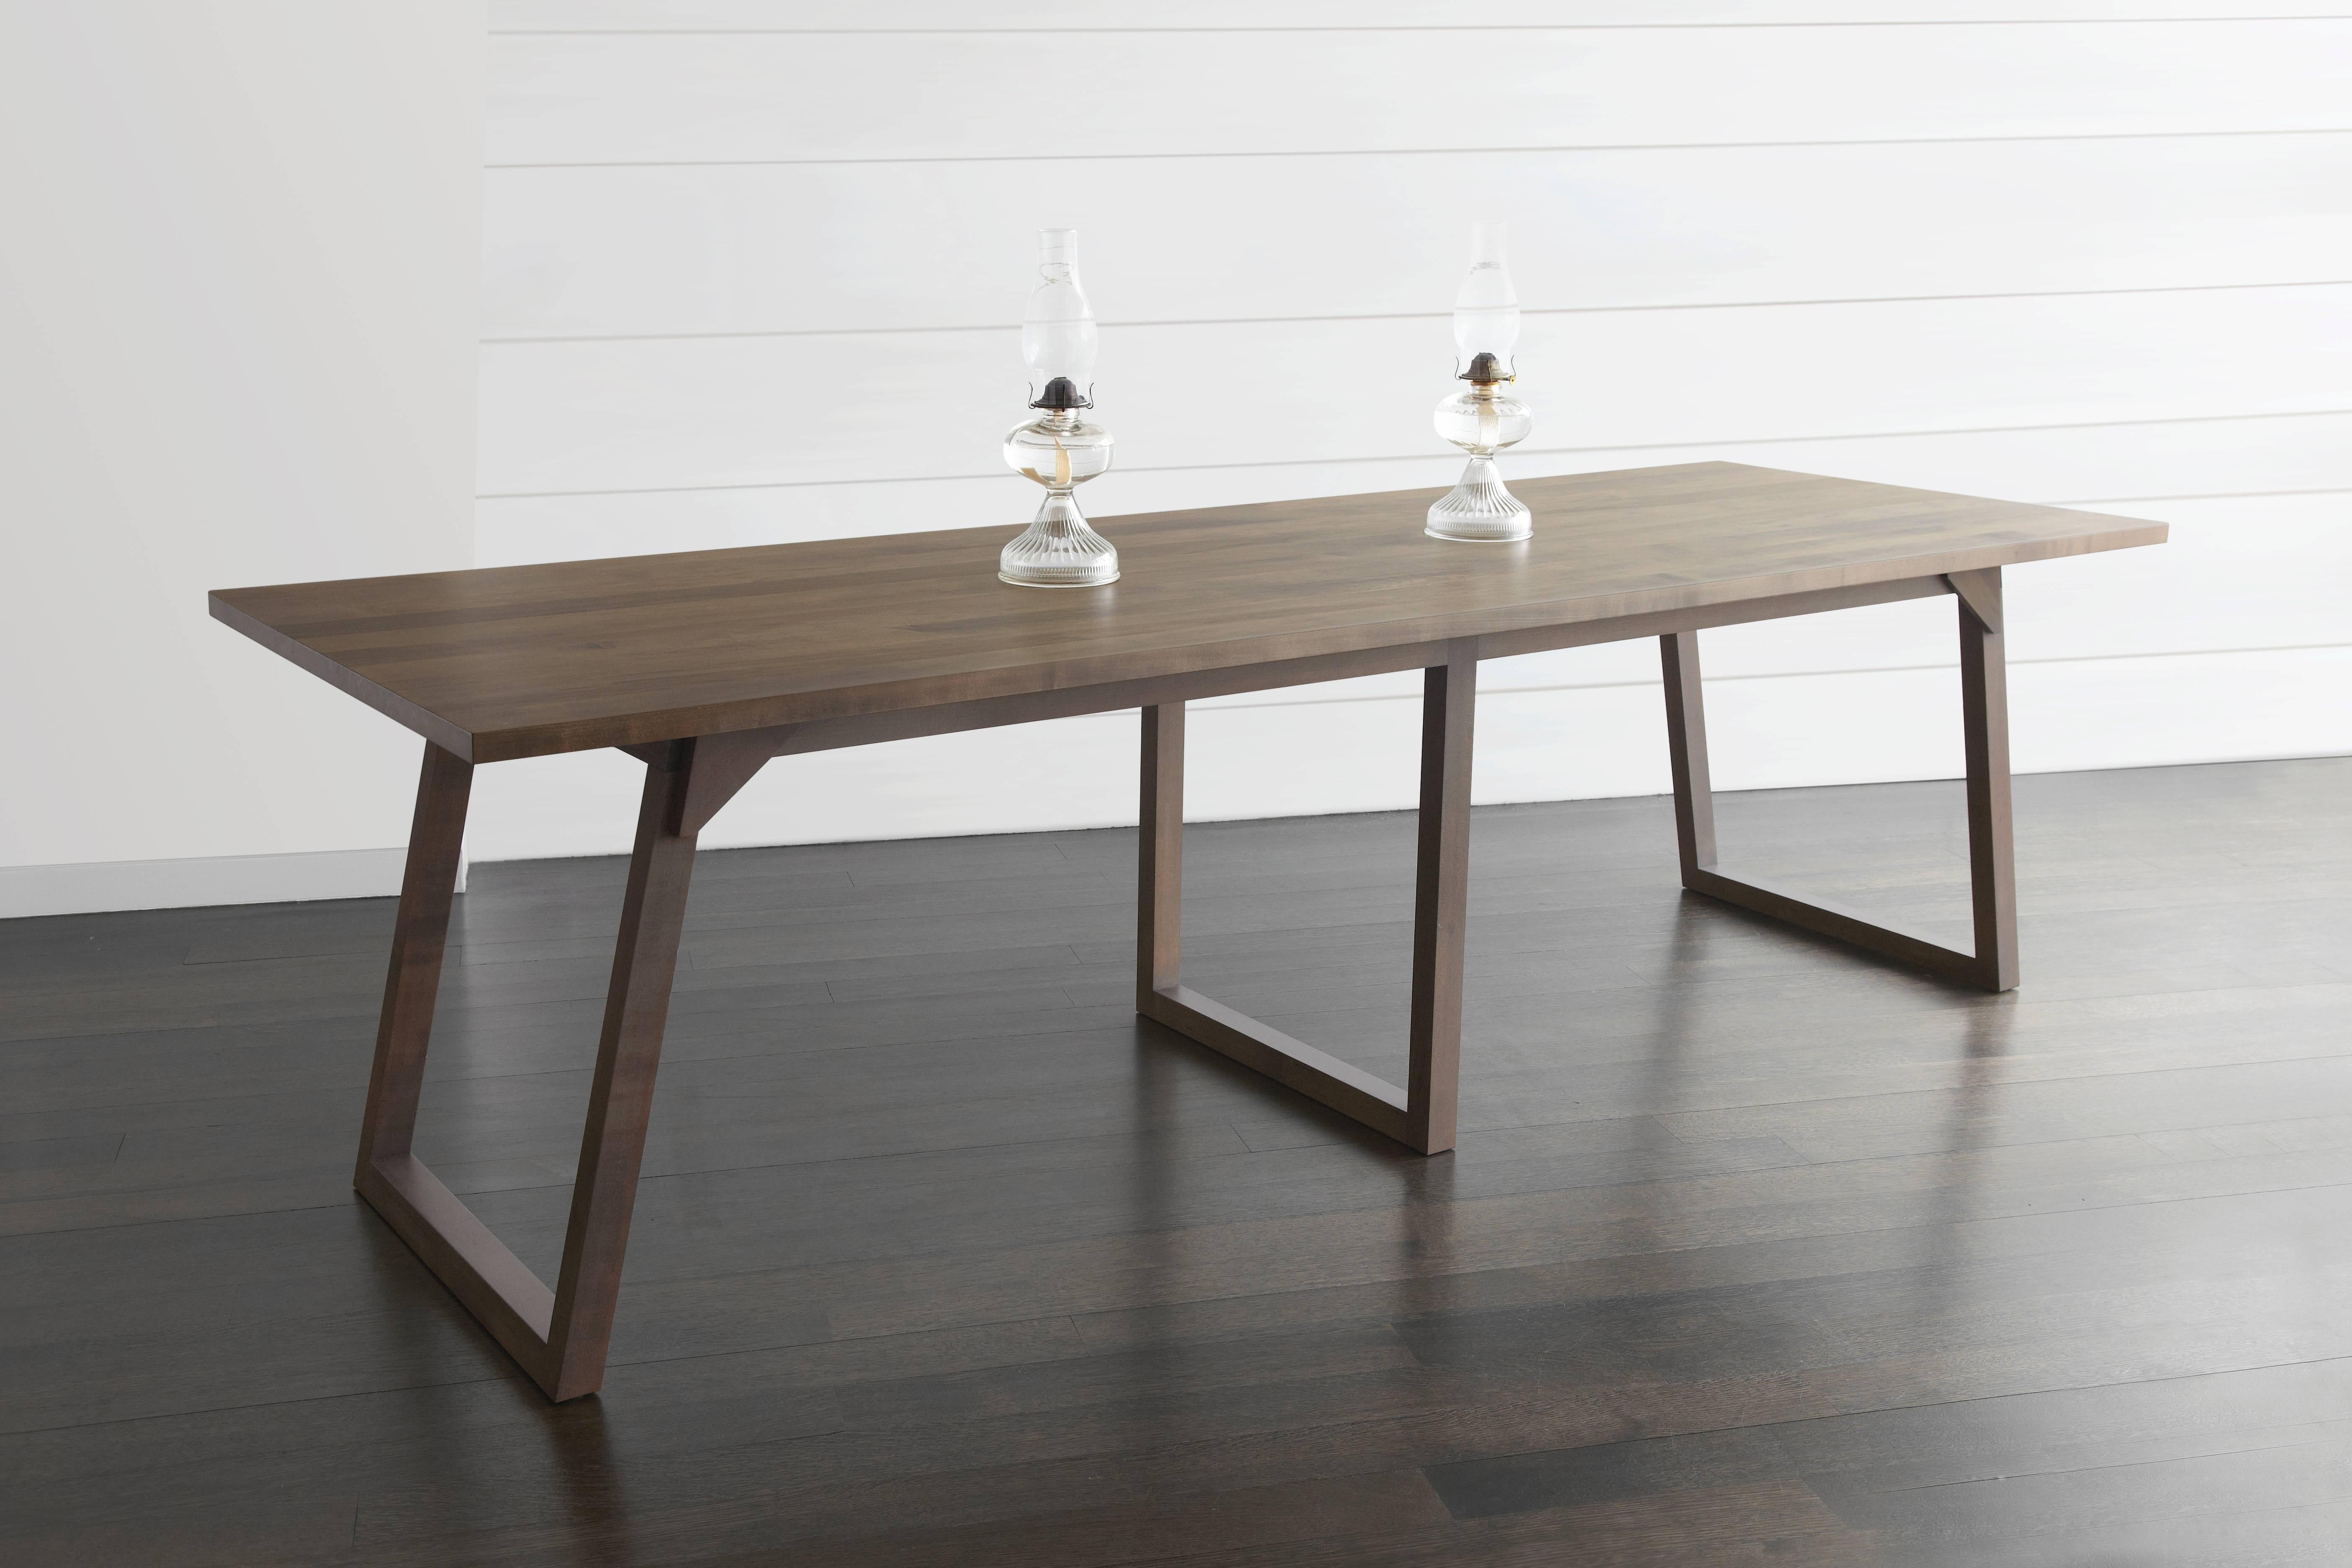 With joined legs and triangular accents akin to the traditional folding table, 
The Familj dining table celebrates large family gatherings. Angled legs are accented with pronounced lap joints. The slender top and the warmth of the oxidized